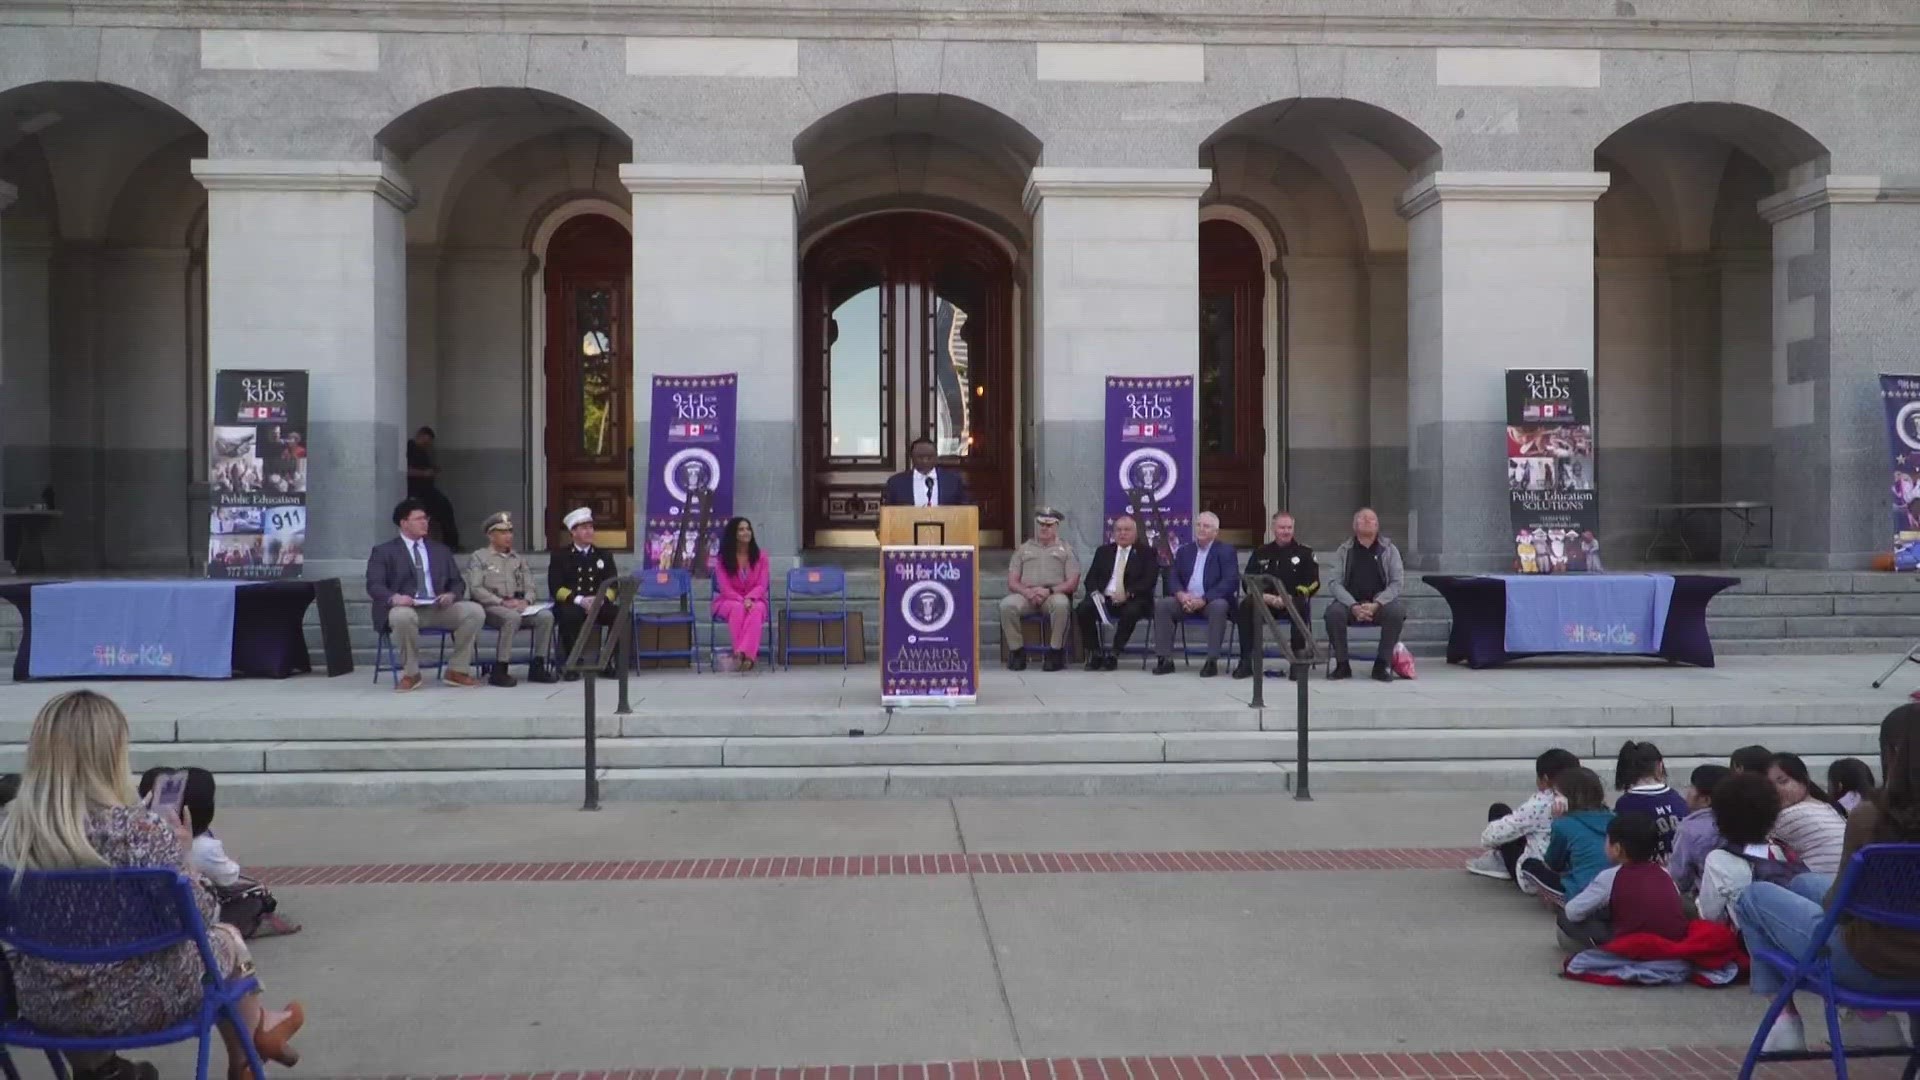 The event was held in Sacramento to honor children who called 911 in an emergency and saved lives.